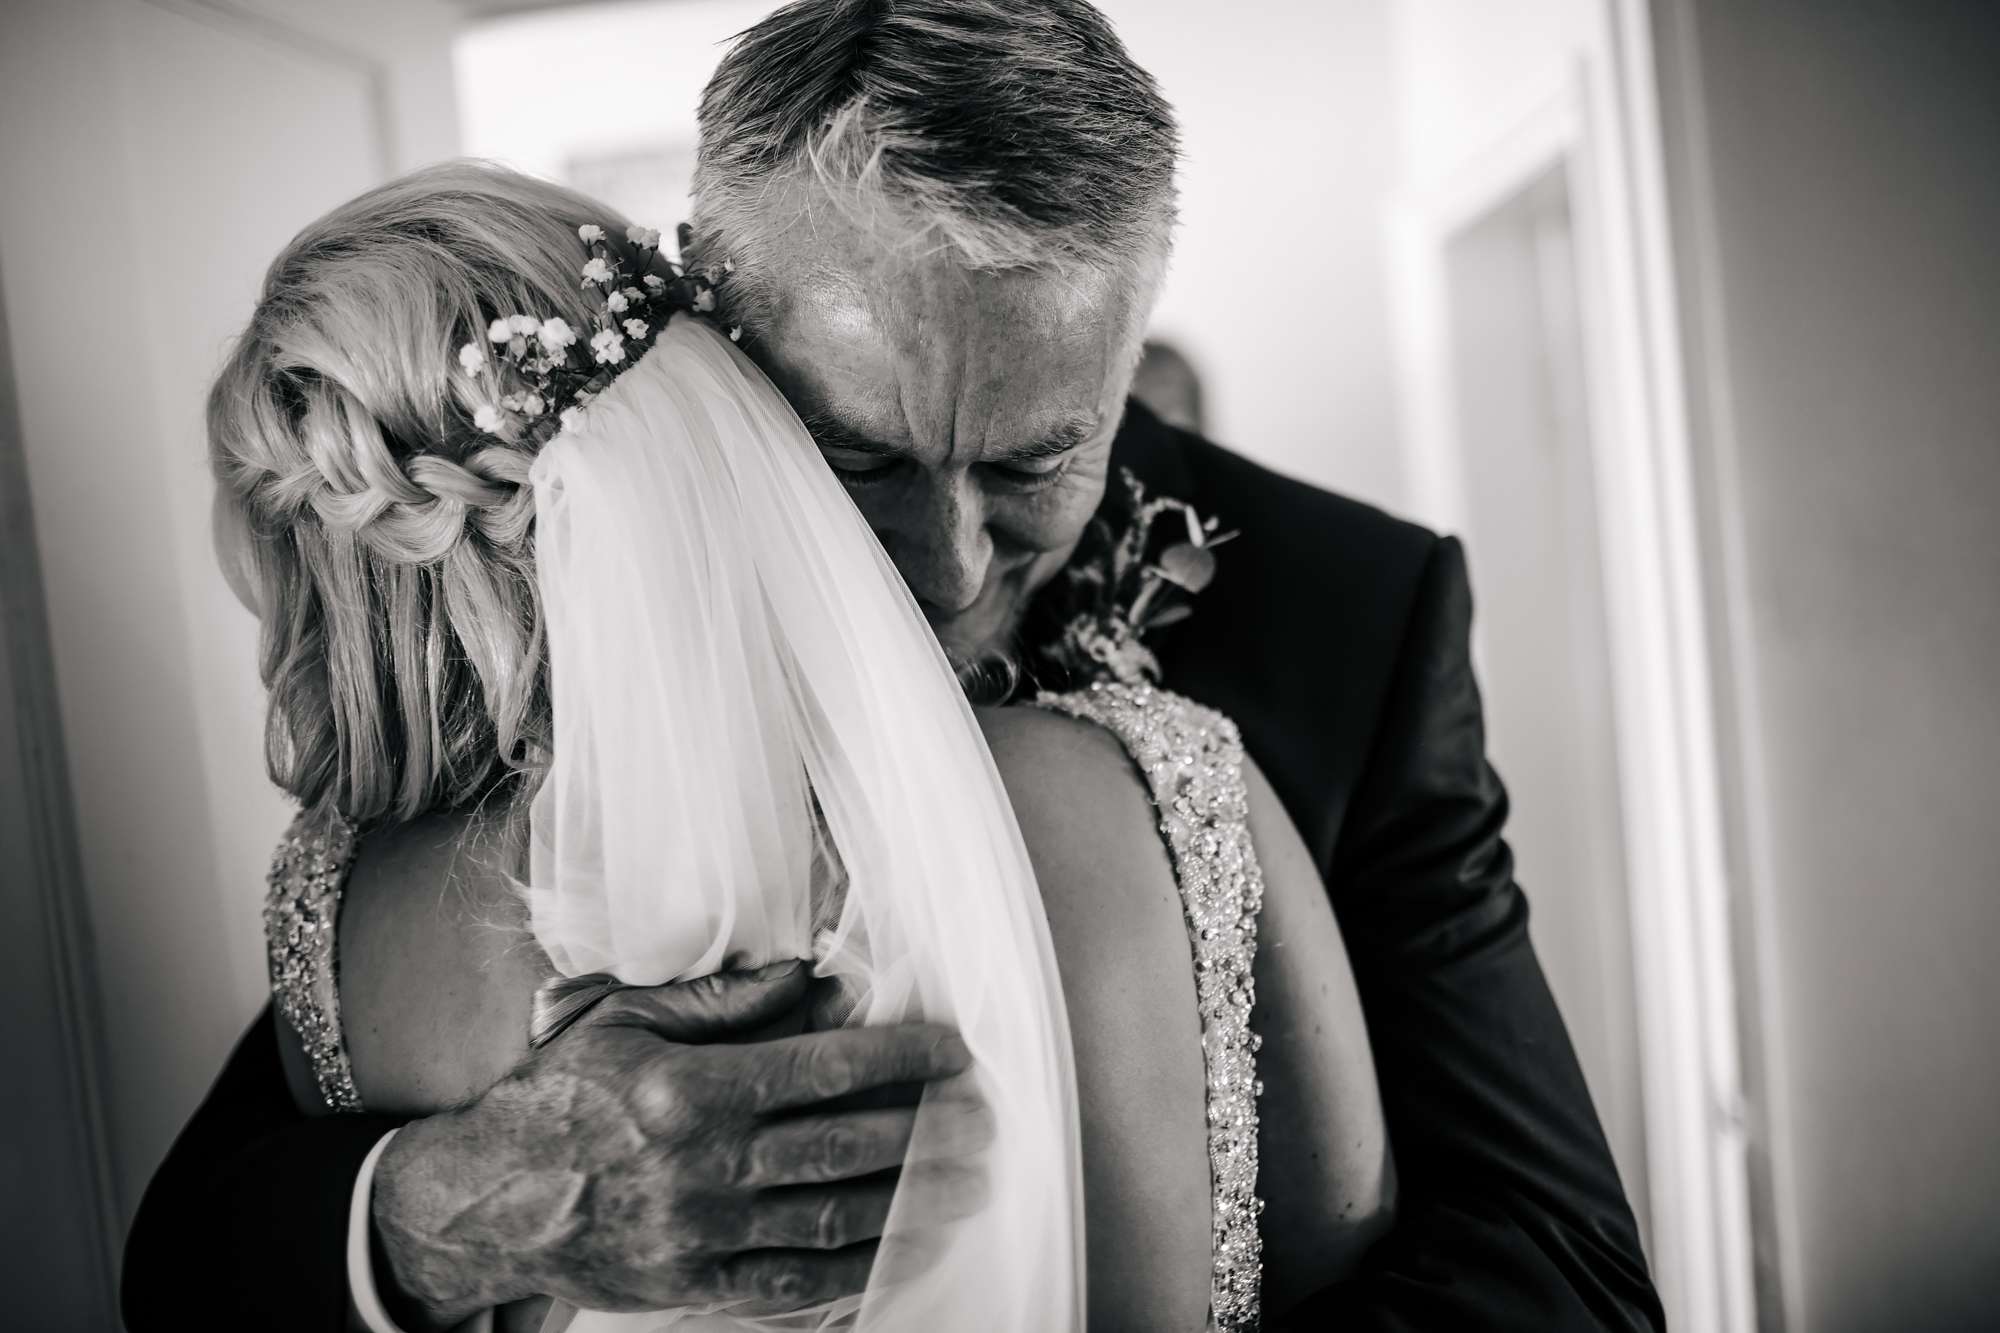 Emotional dad sees bride for the first time hugging